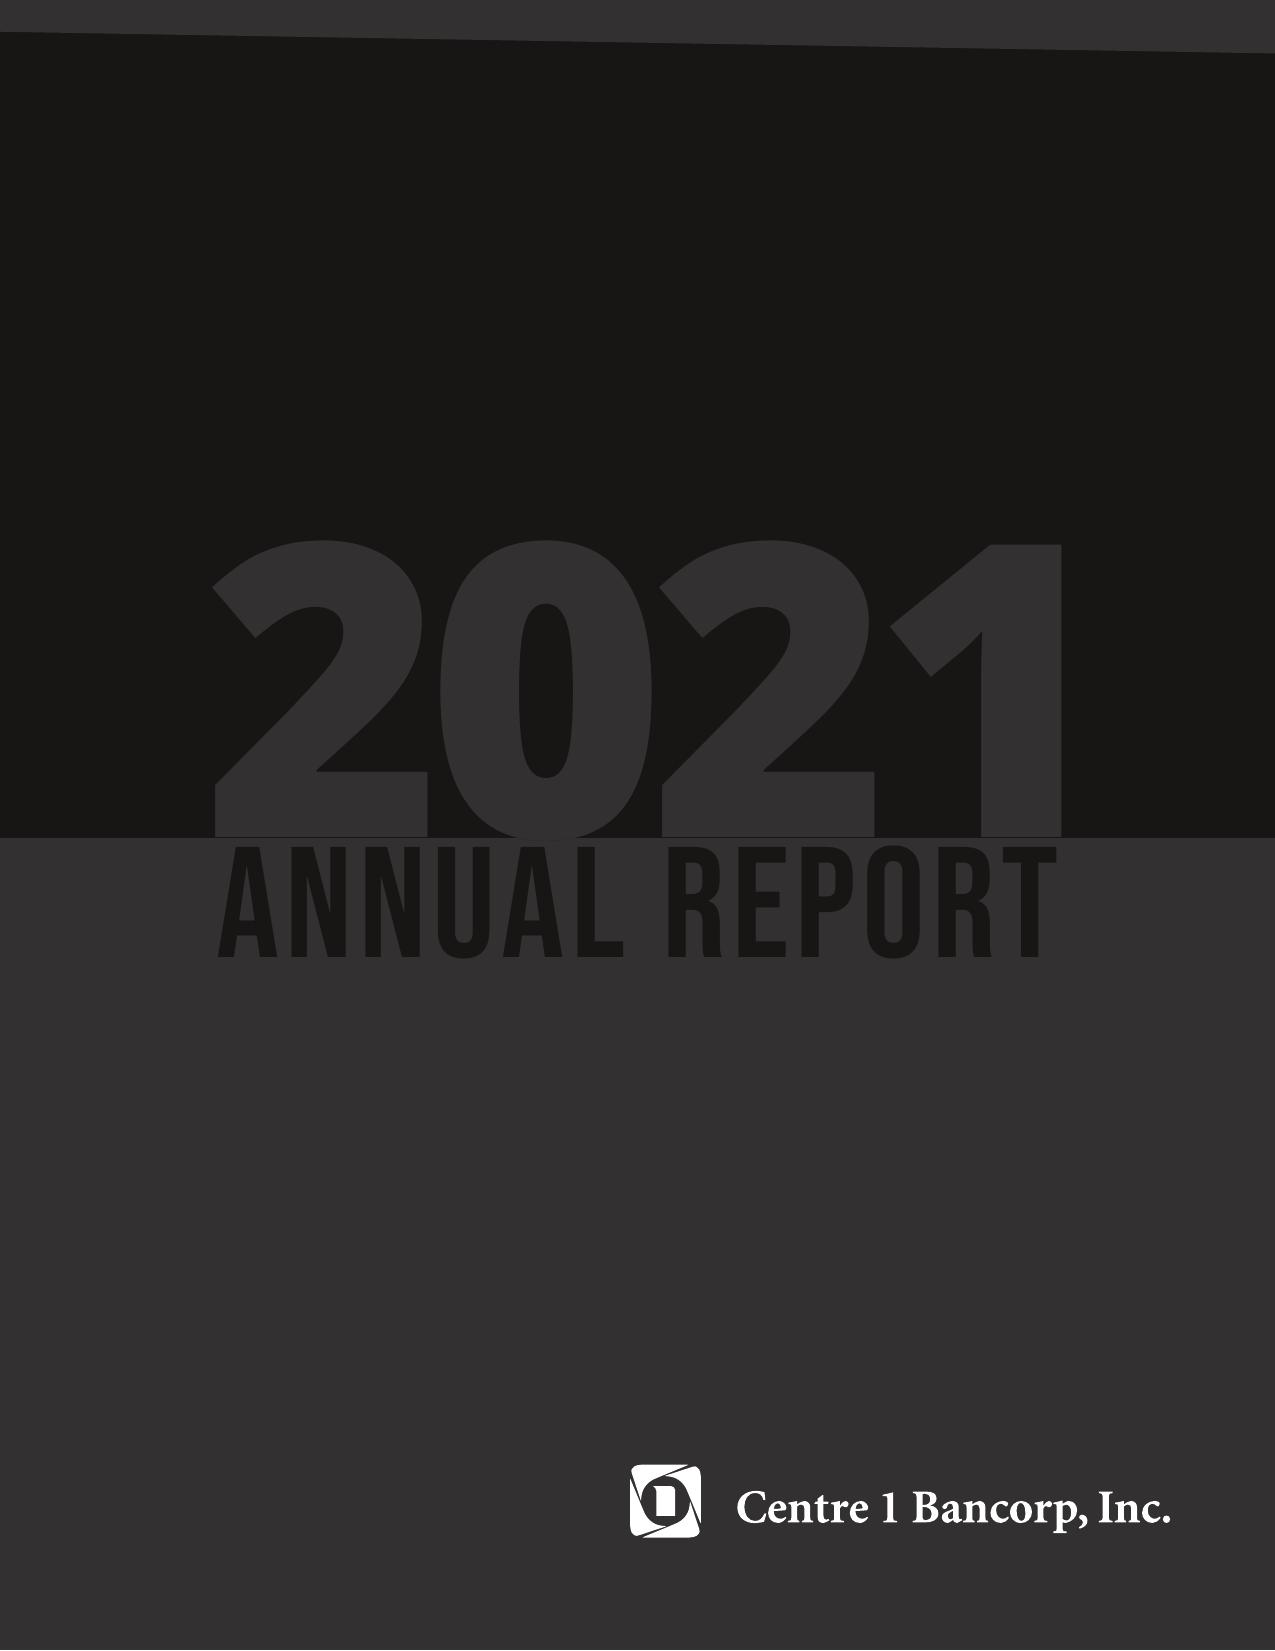 BANKWITHUNITED Annual Report